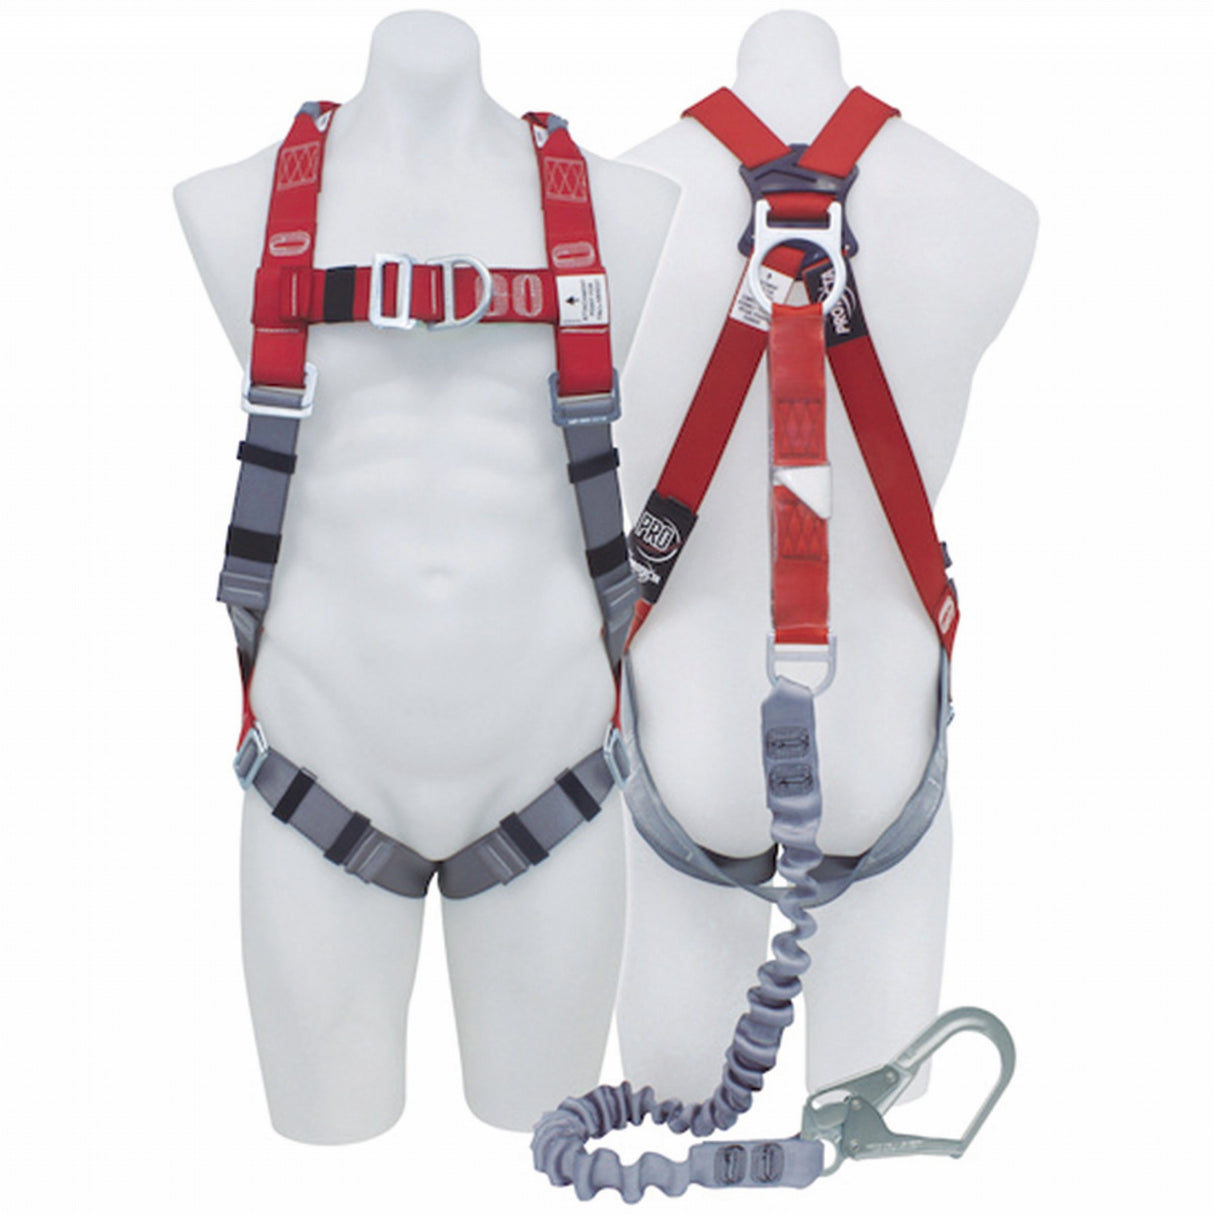 Protecta PRO Riggers Harness with Elasticated Integral Lanyard & Scaffold Hook